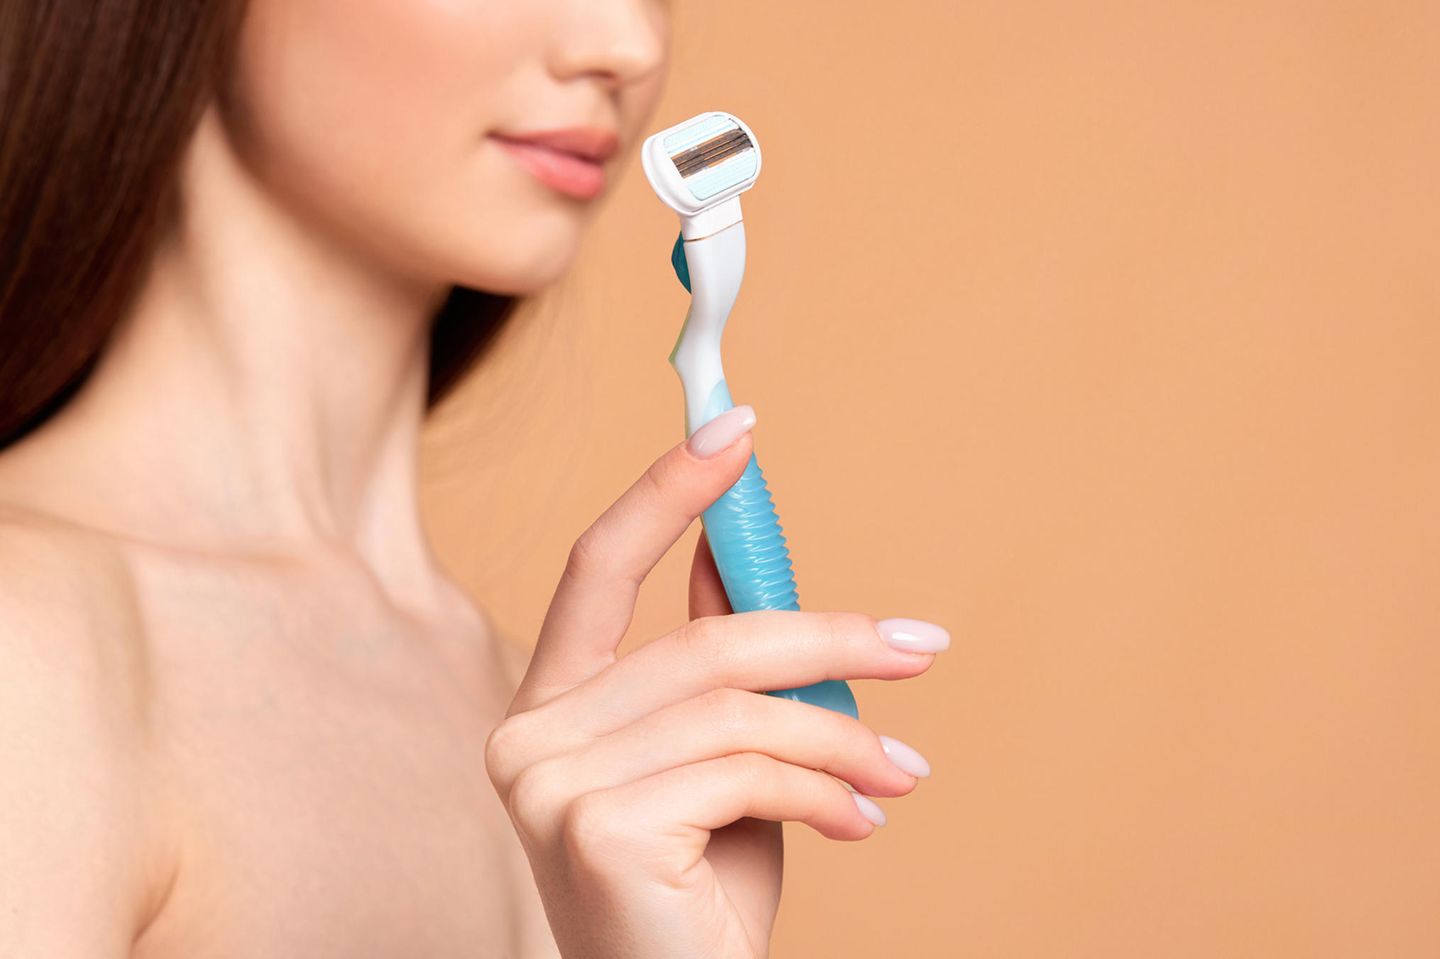 Intimate shave: woman holds wet razor